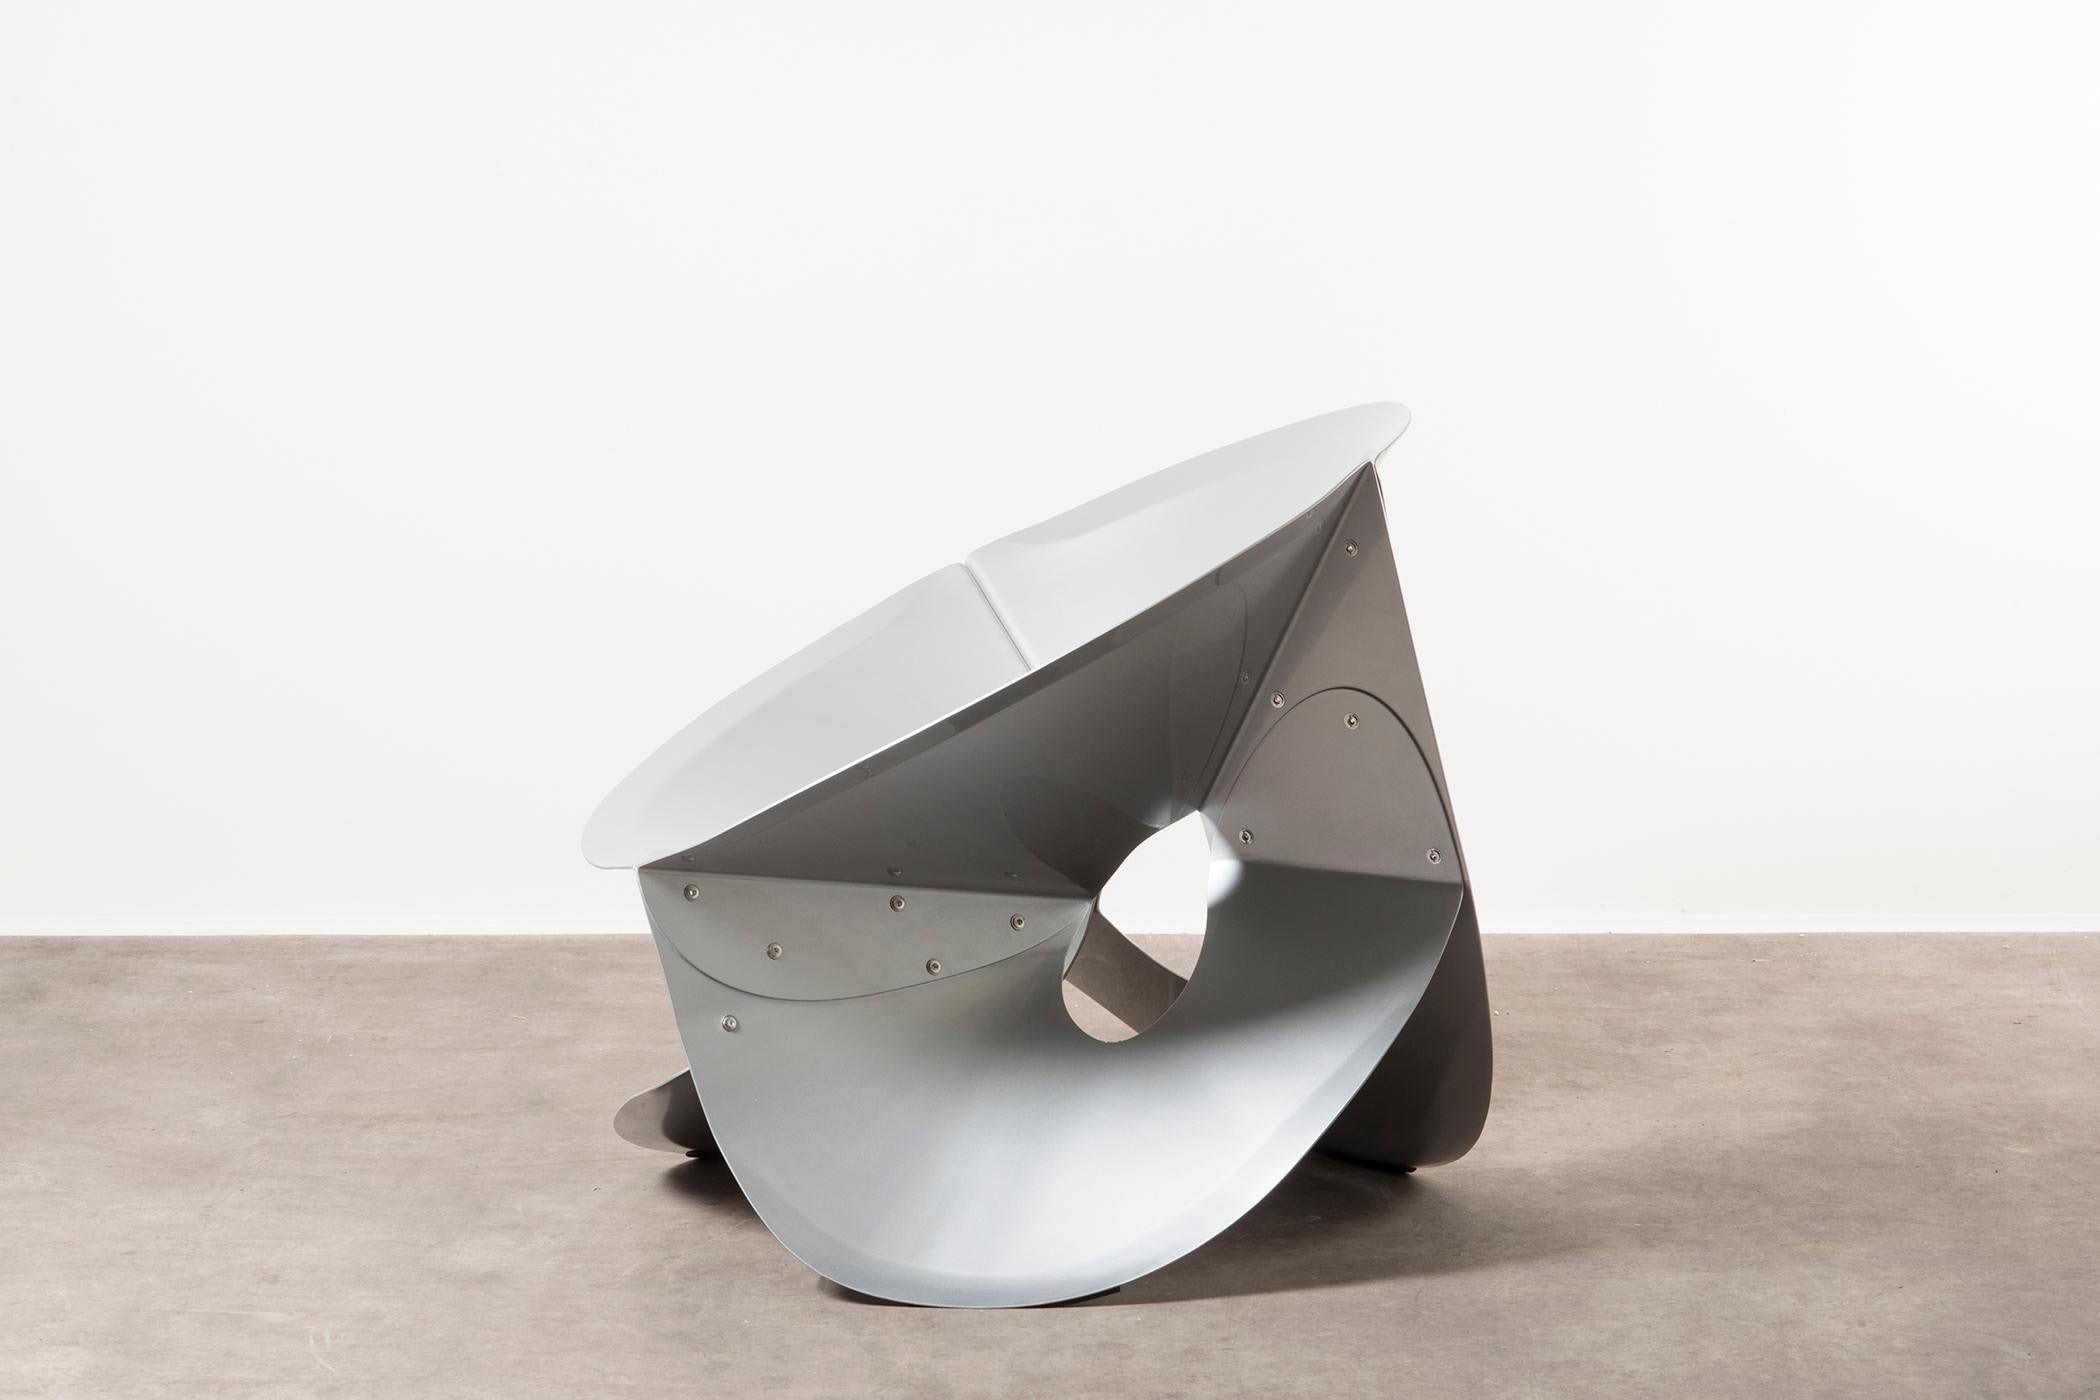 Chair Swirl by Michael Schoner, the Netherlands, 2019. Nilufar edition. Aluminum, power-coated. Measures: 90 x 84 x H 76 cm, 35.4 x 33 x H 30 in. The metal movements of Michael Schoner’s objects are extreme experiments on the theme of seating. They